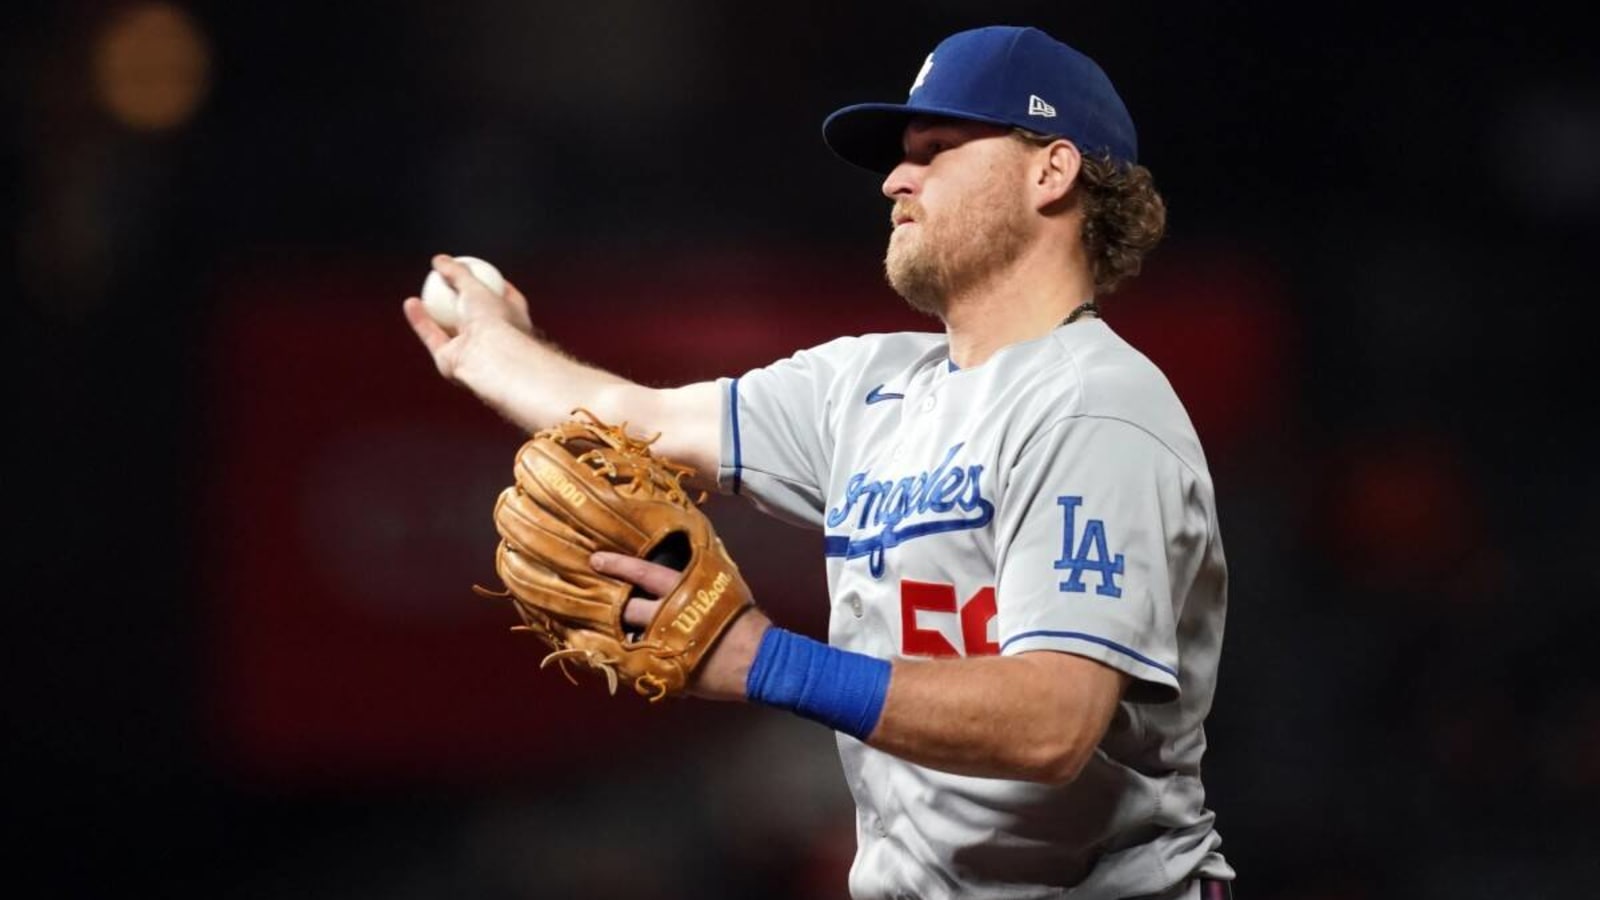 Former Dodgers Infielder Re-Signs With Hanshin Tigers in Japan